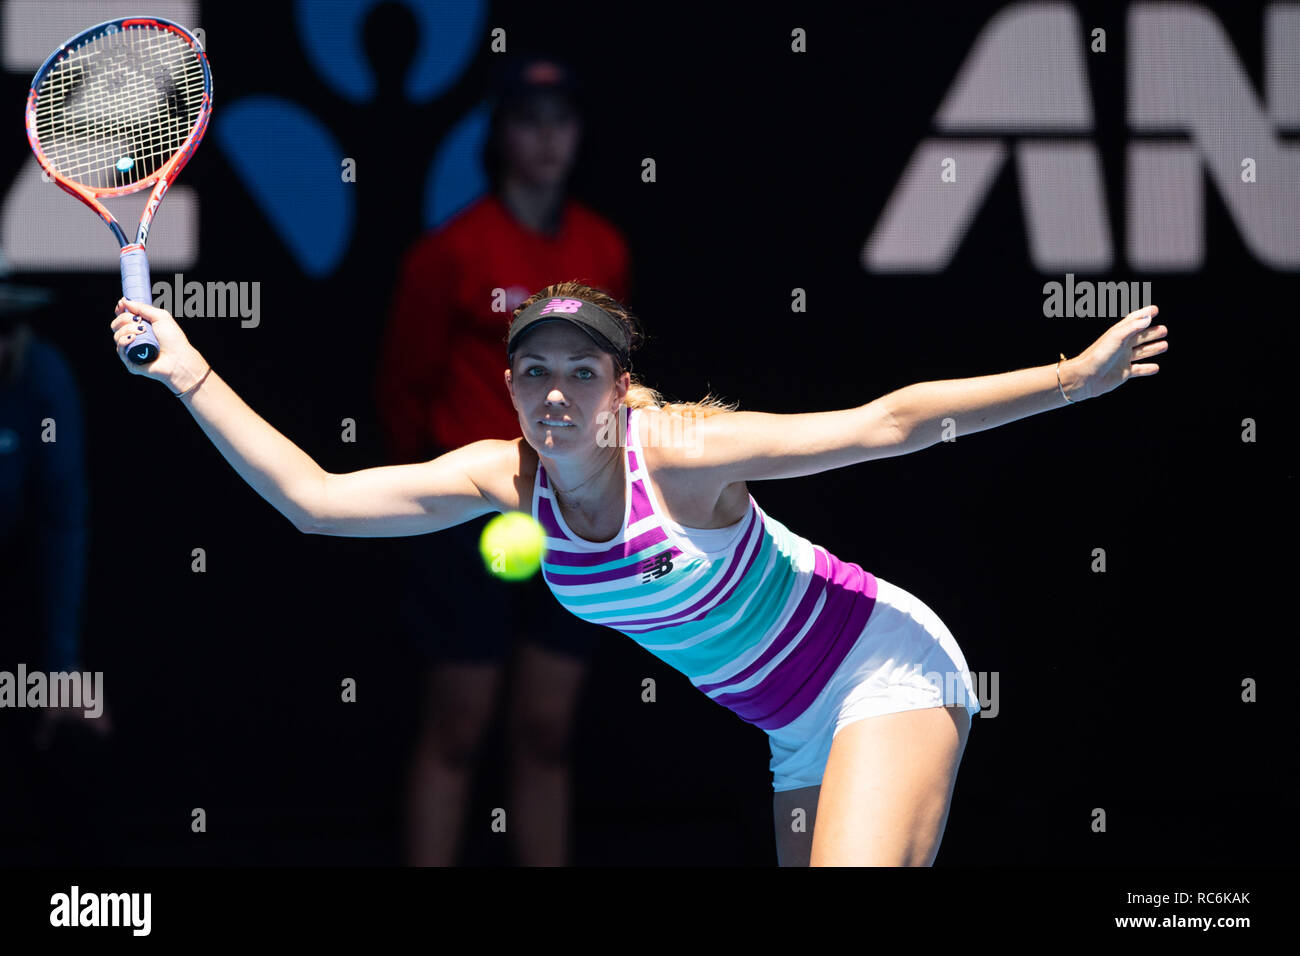 Melbourne, Australia. 14th Jan, 2019. Danielle Collins of the United States  returns the ball during the women's singles first round match between  Danielle Collins of the United States and Julia Goerges of